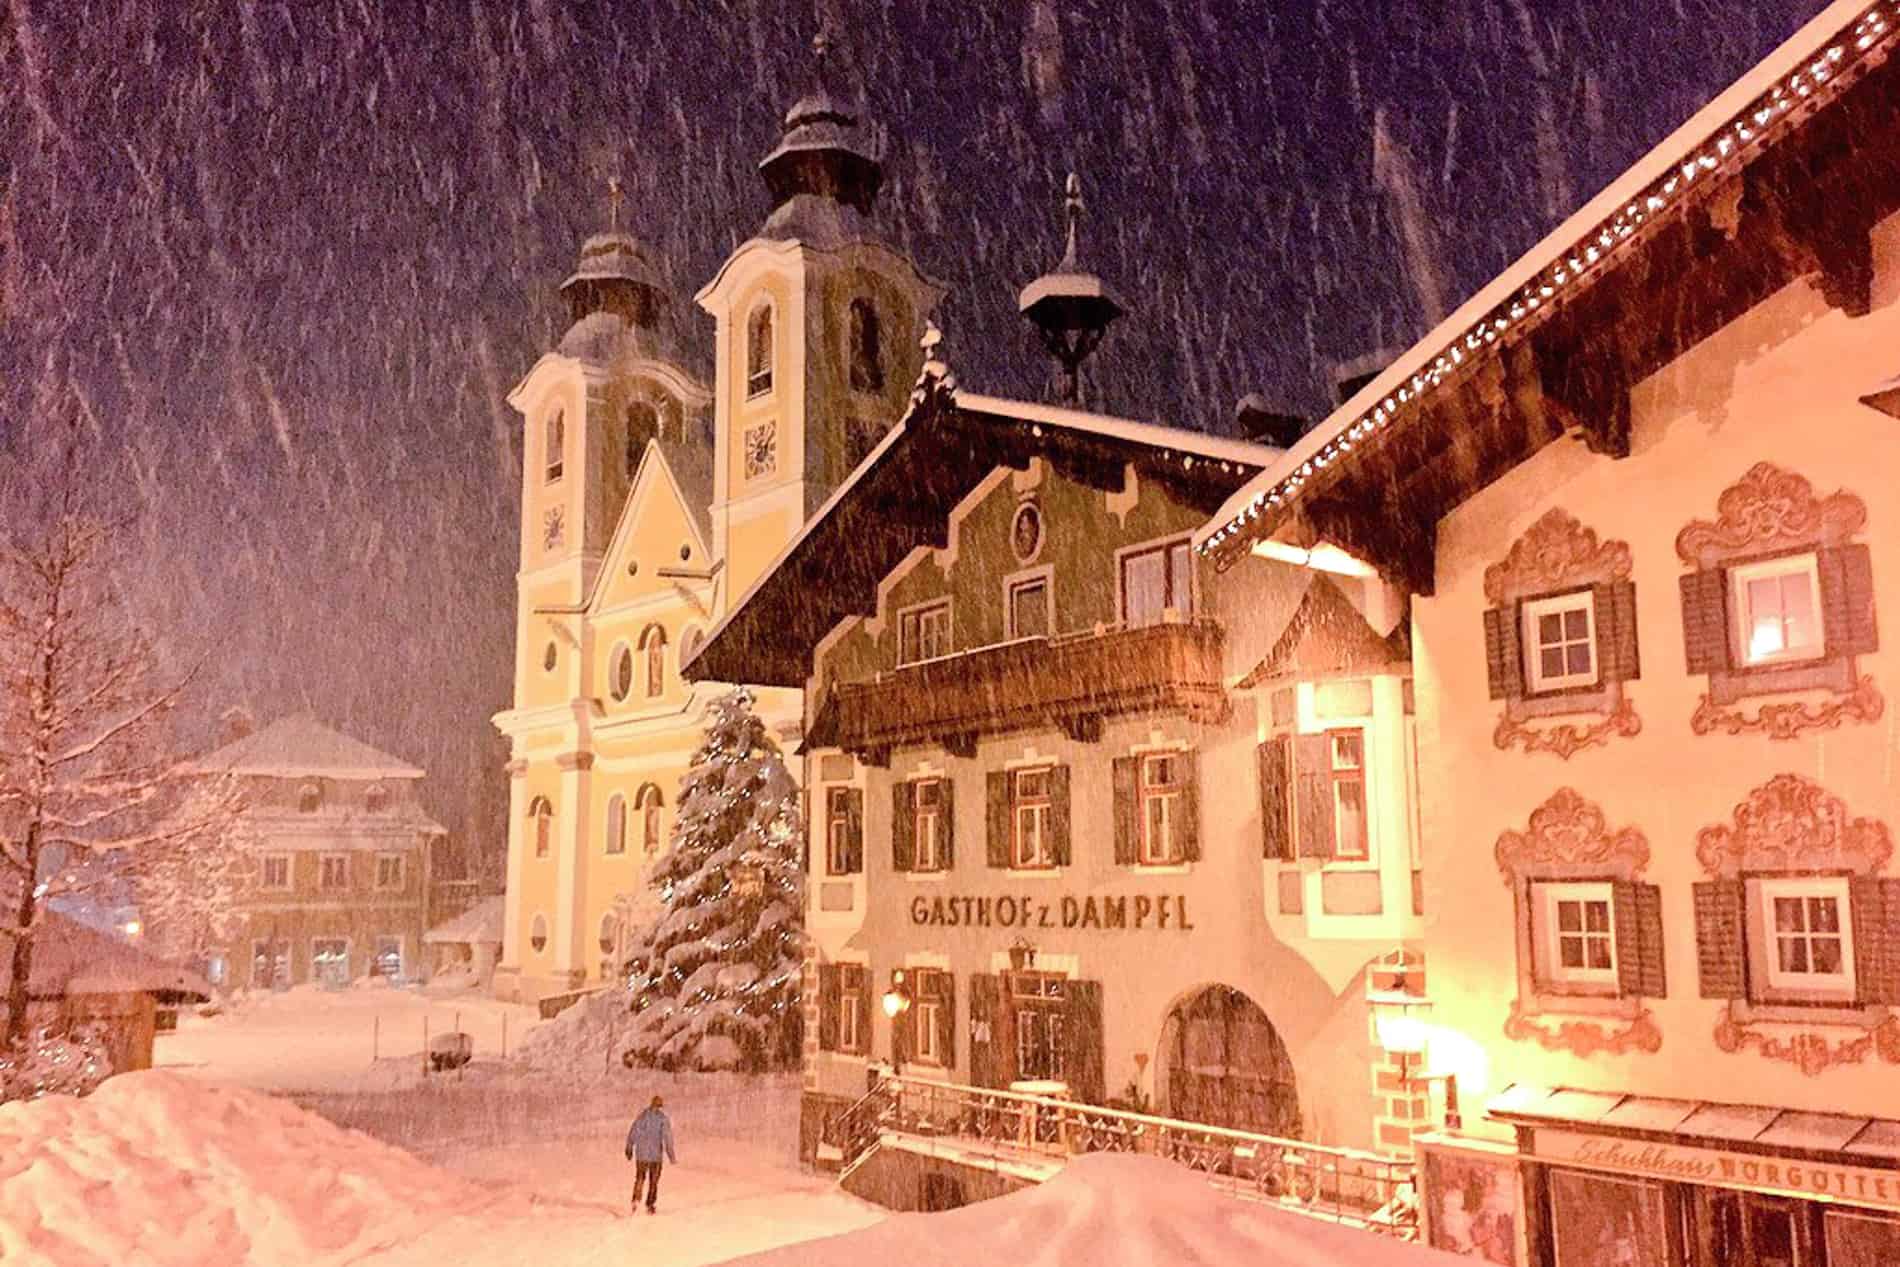 Snow falls over the painted facades of traditional Austrian mountain village huts and the church in St. Johann in Tirol. 